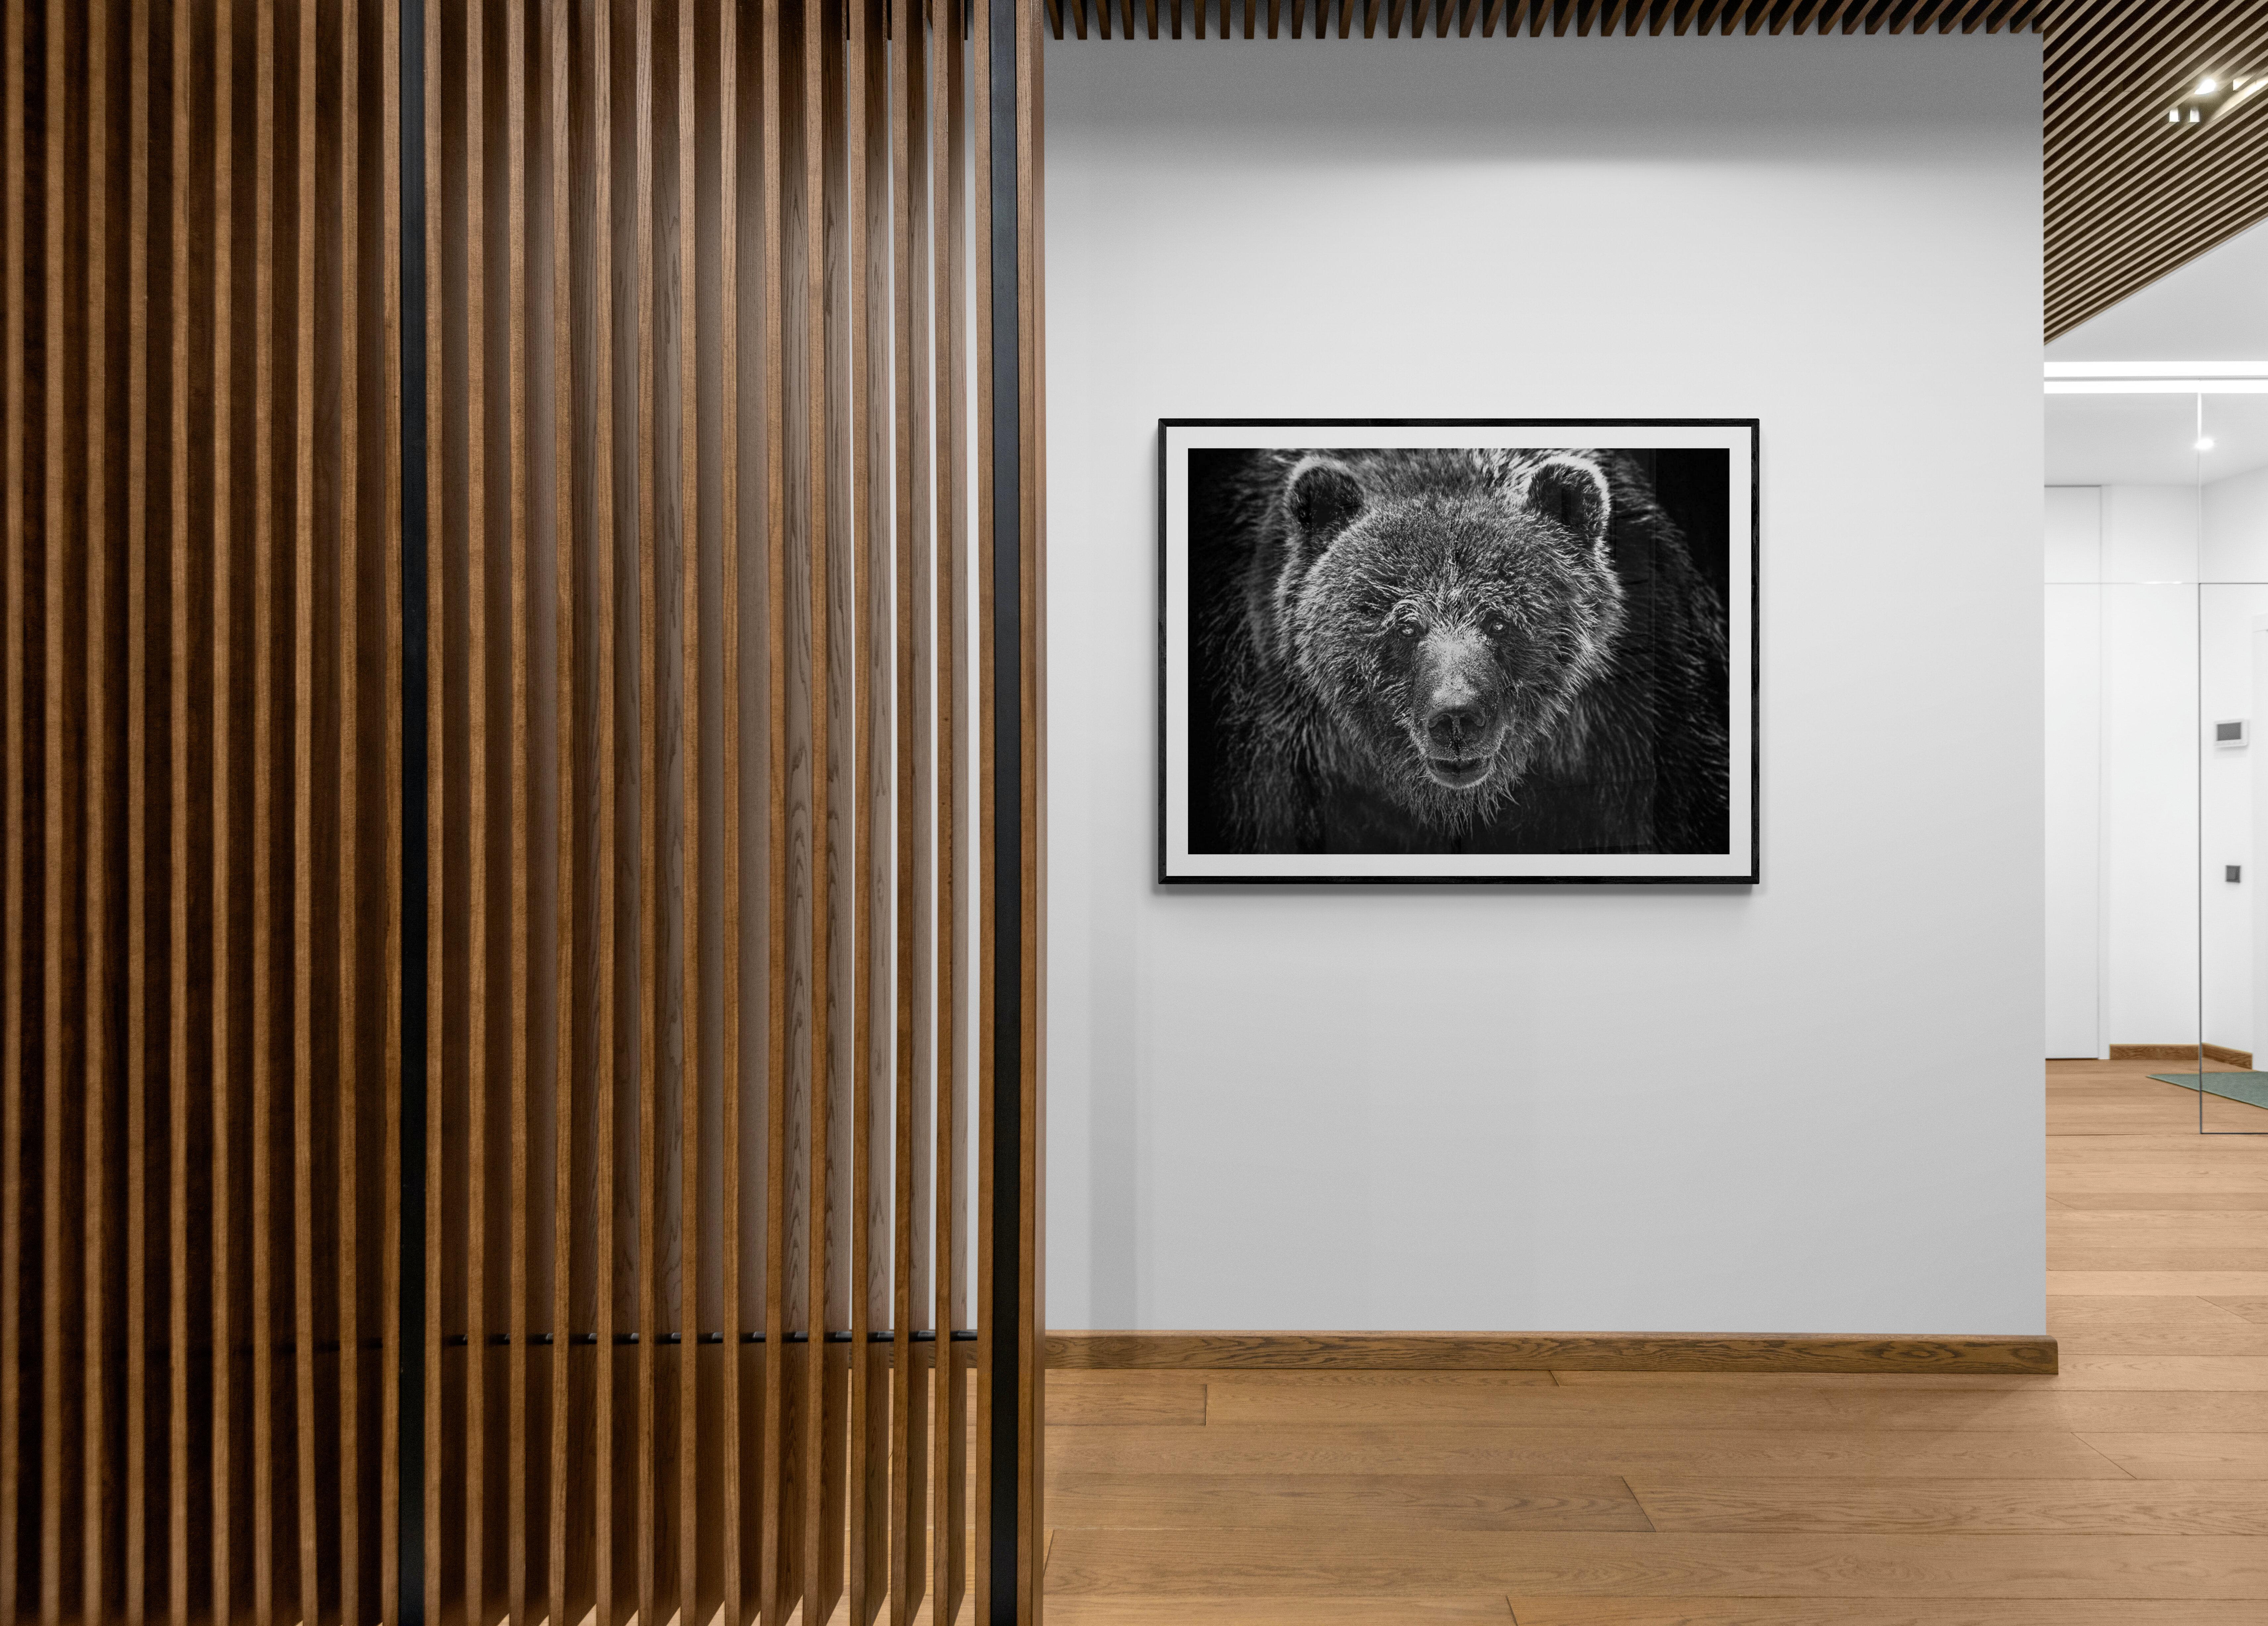 Grizzly Bear Portrait
An rare look into the eyse of an apex predator
36x48  Edition of 12. Signed by Shane.  
Printed on archival paper and using archival inks
 Framing available. Inquire for rates.   

 Shane Russeck has built a reputation for